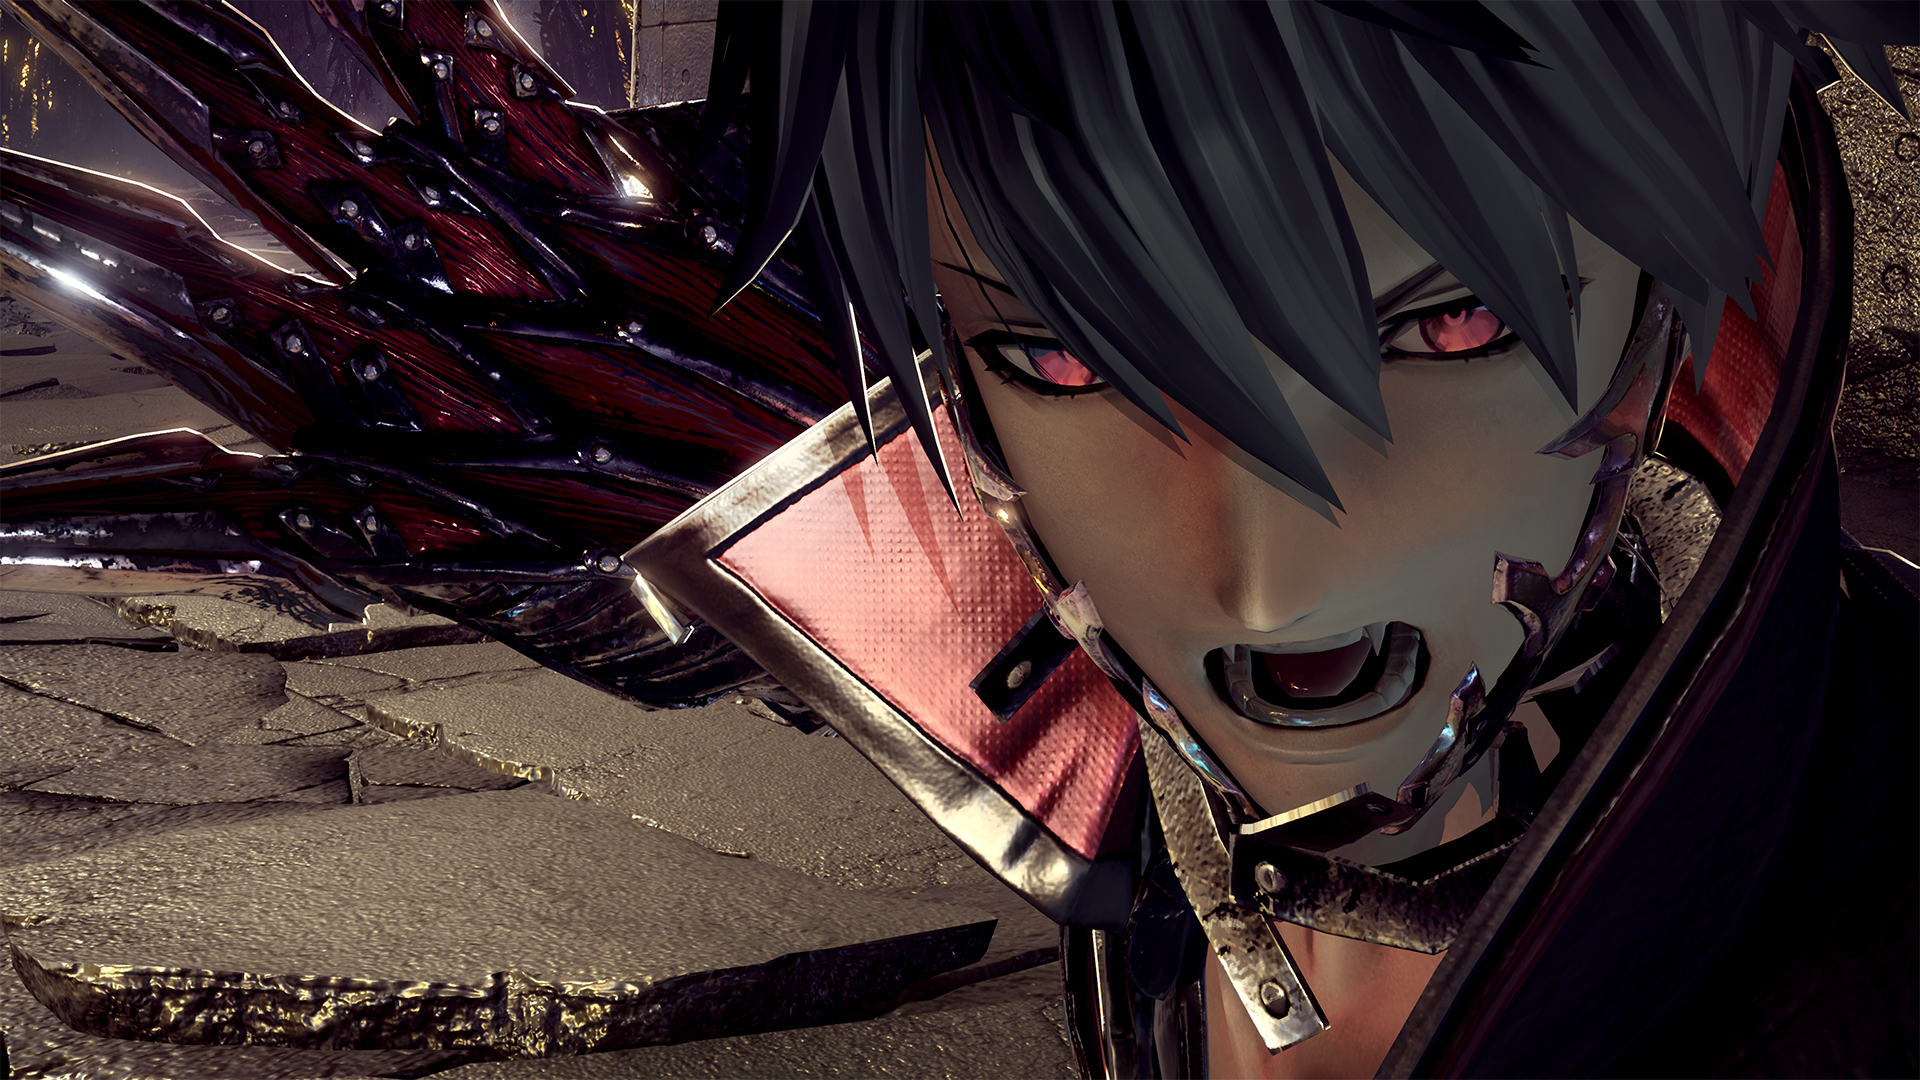 Code vein - Anime Another World